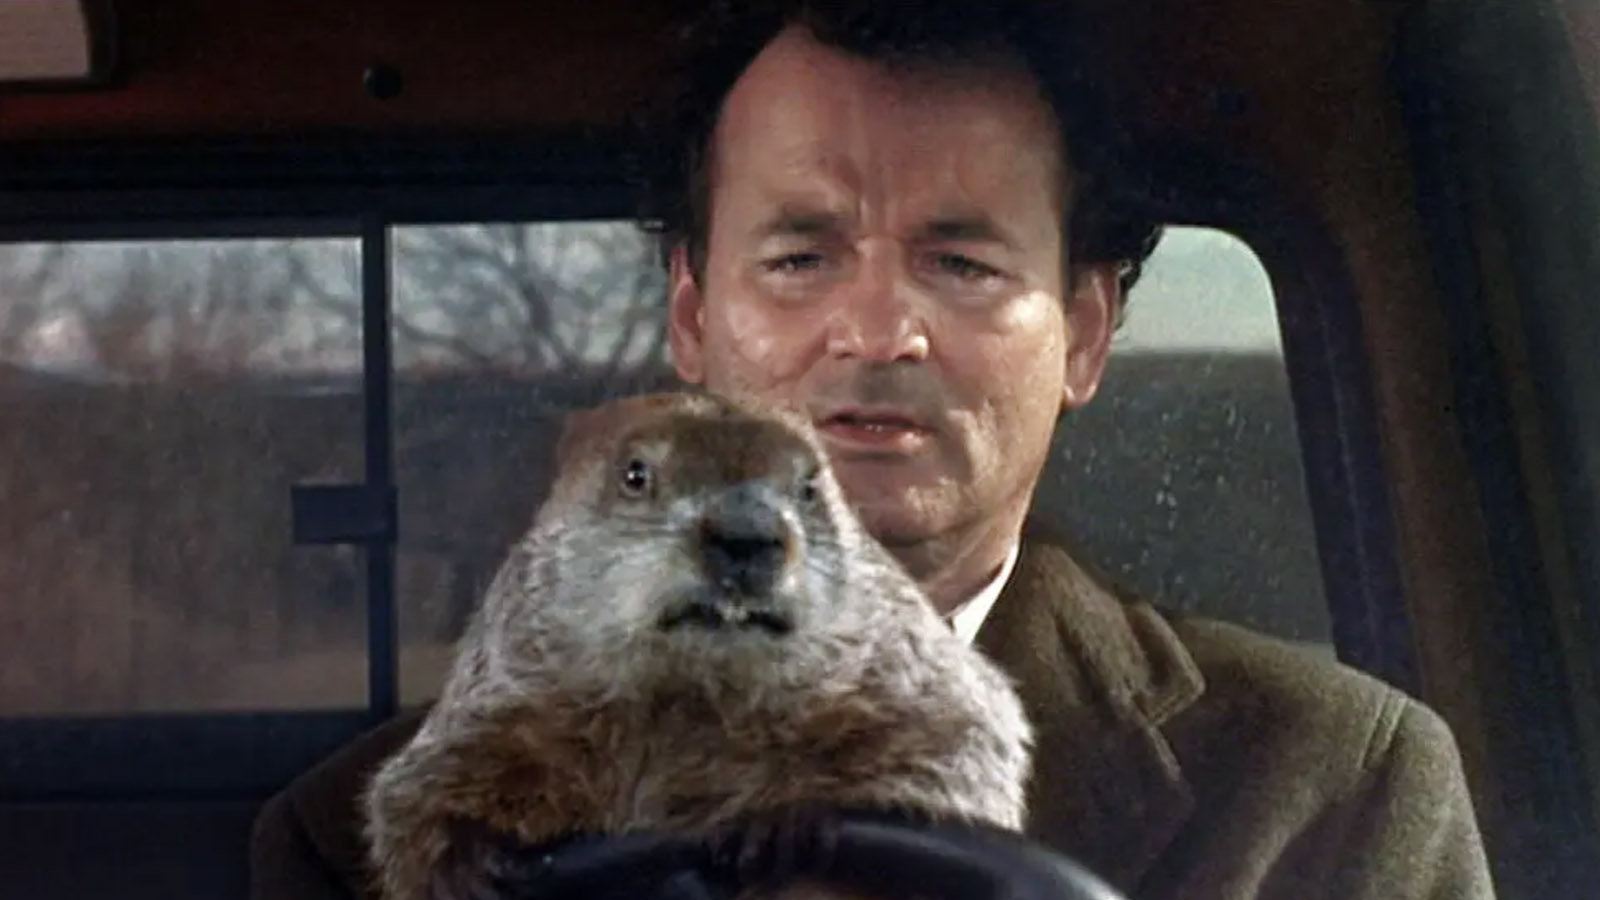 After 30 years, Buddhist-inspired message of ‘Groundhog Day’ still holds spiritual power